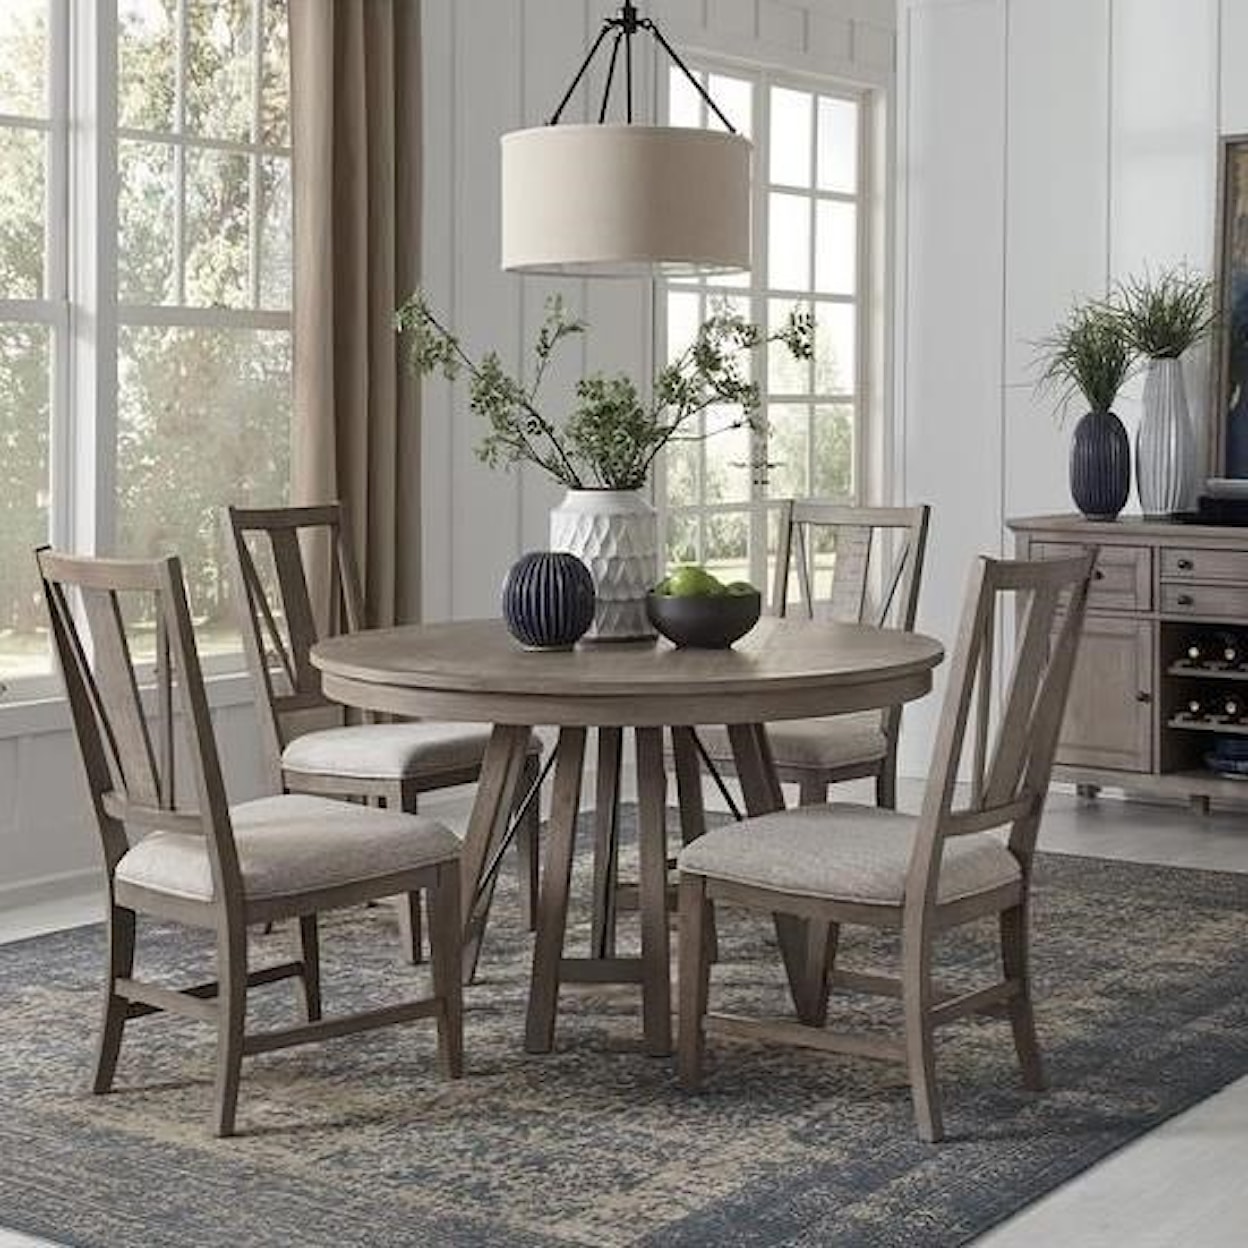 Magnussen Home Paxton Place Dining 5-Piece Dining Set